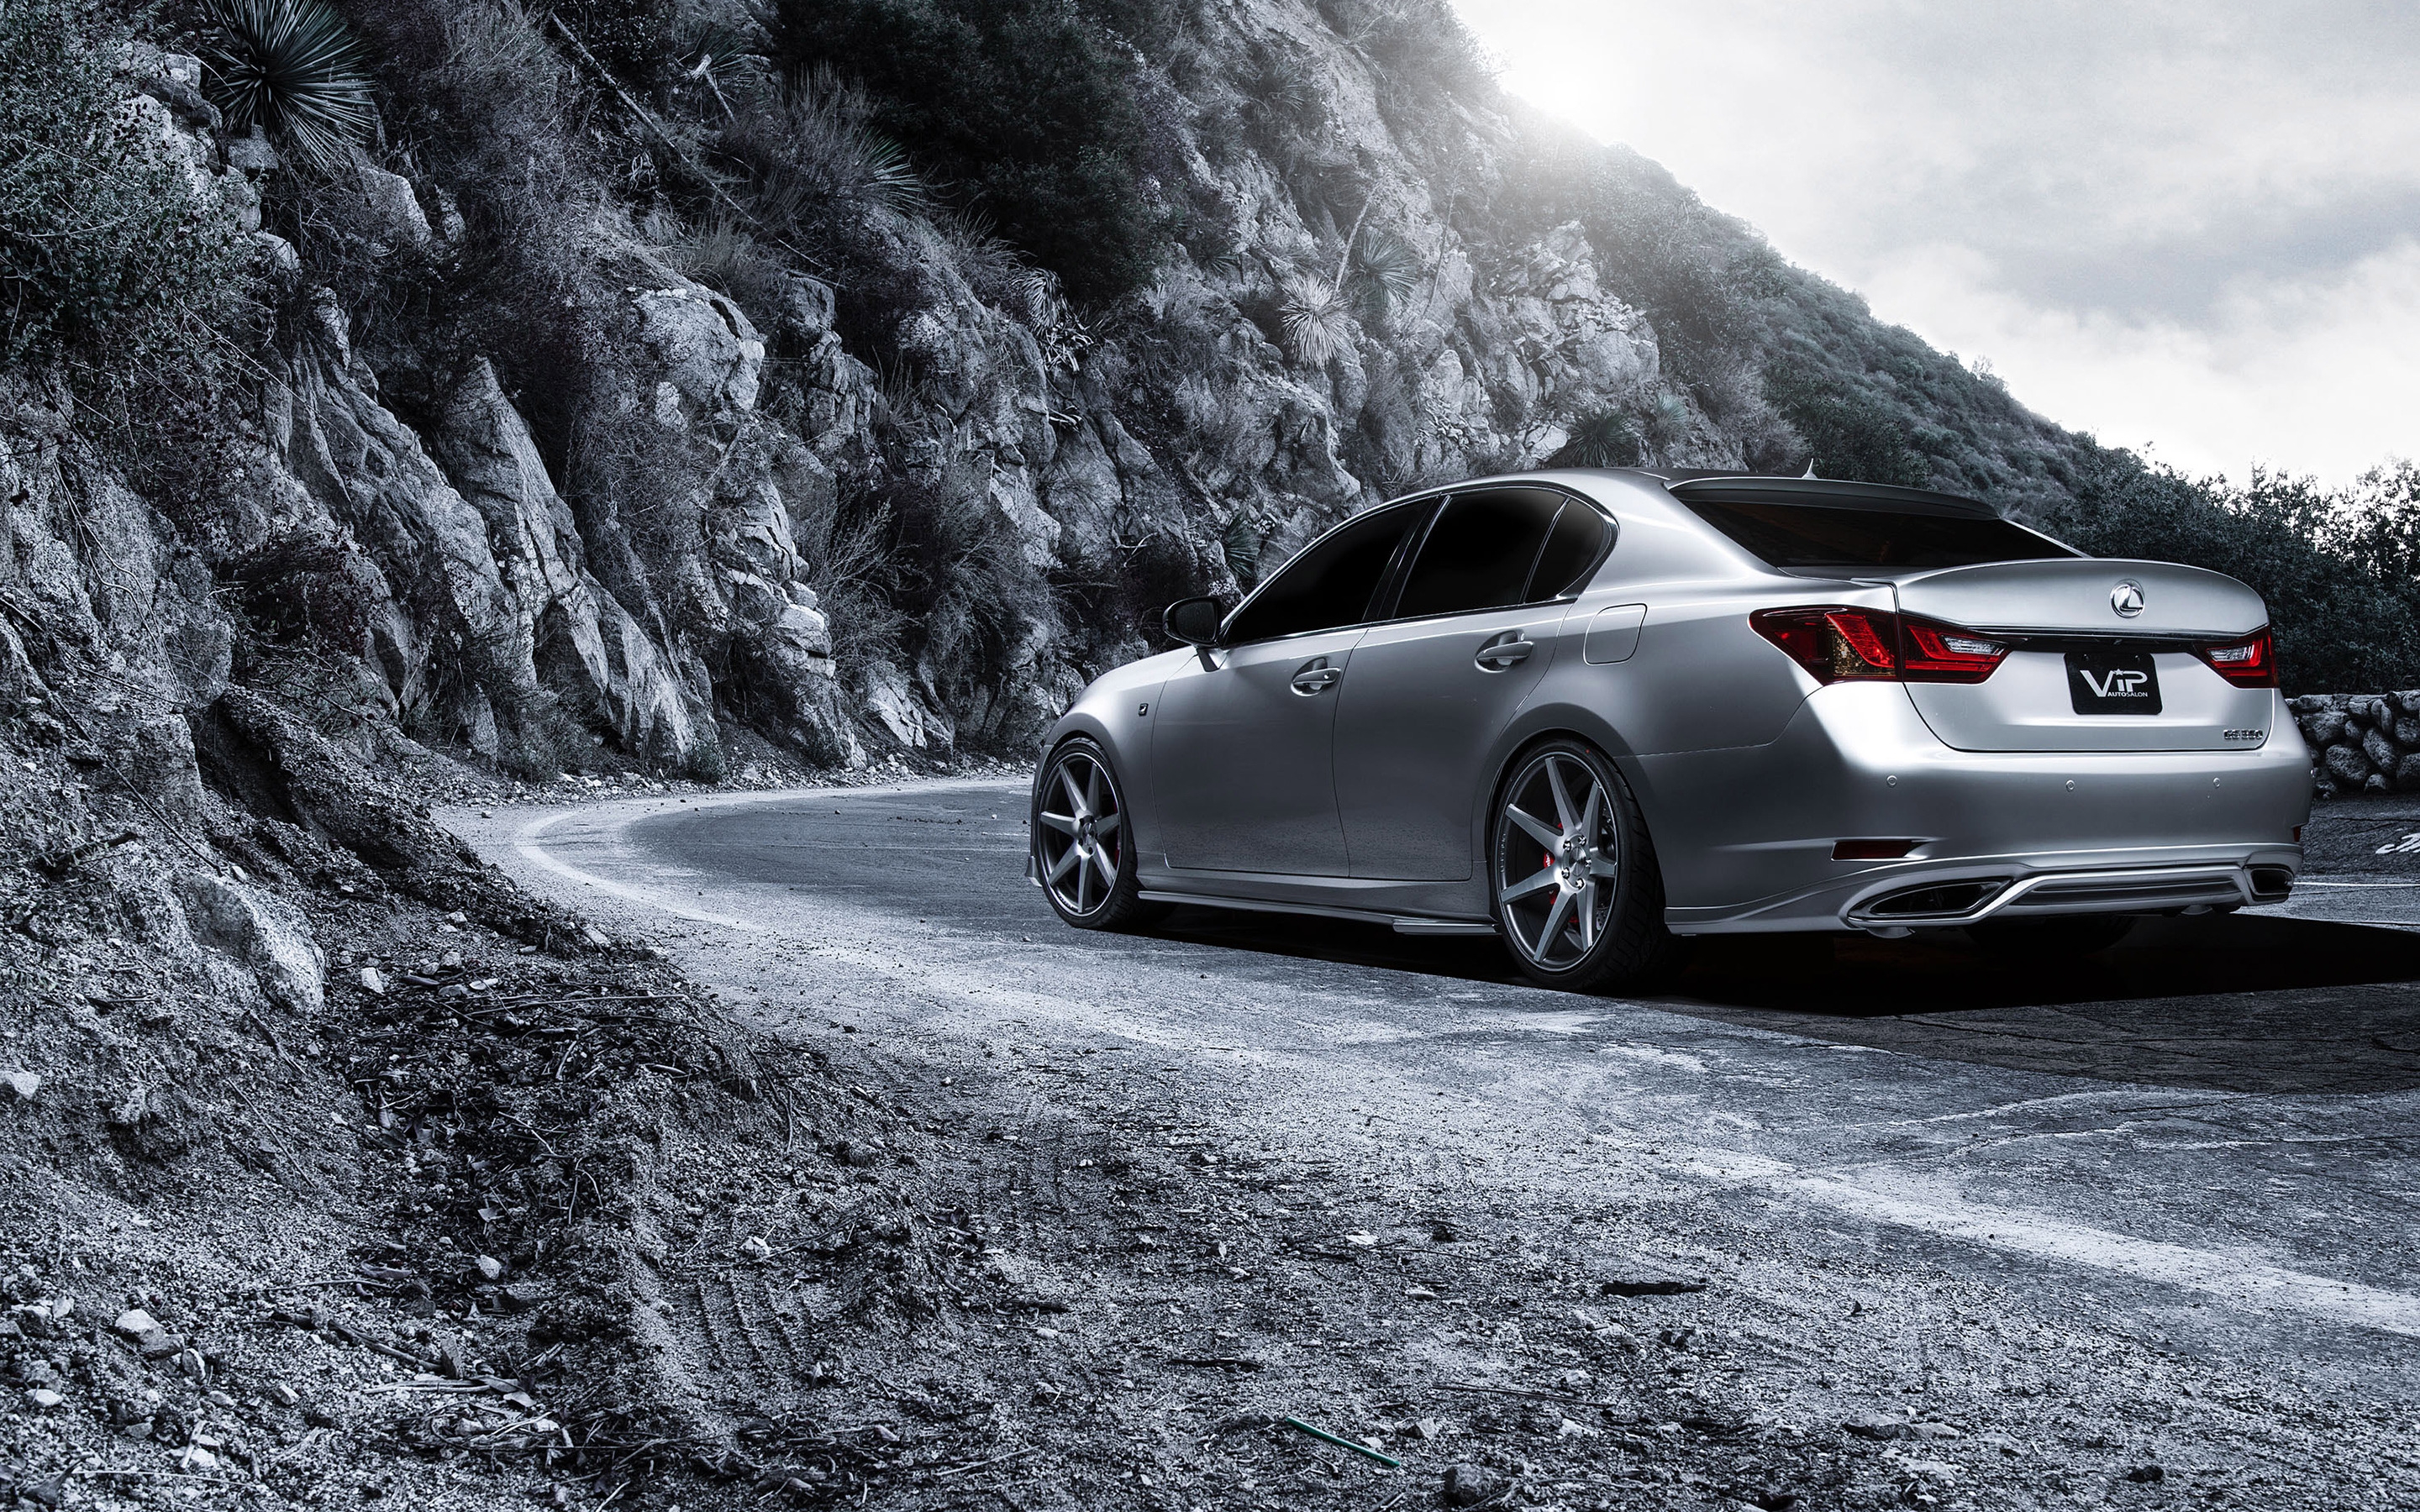 Lexus GS 350 Supercharged Rear for 2880 x 1800 Retina Display resolution